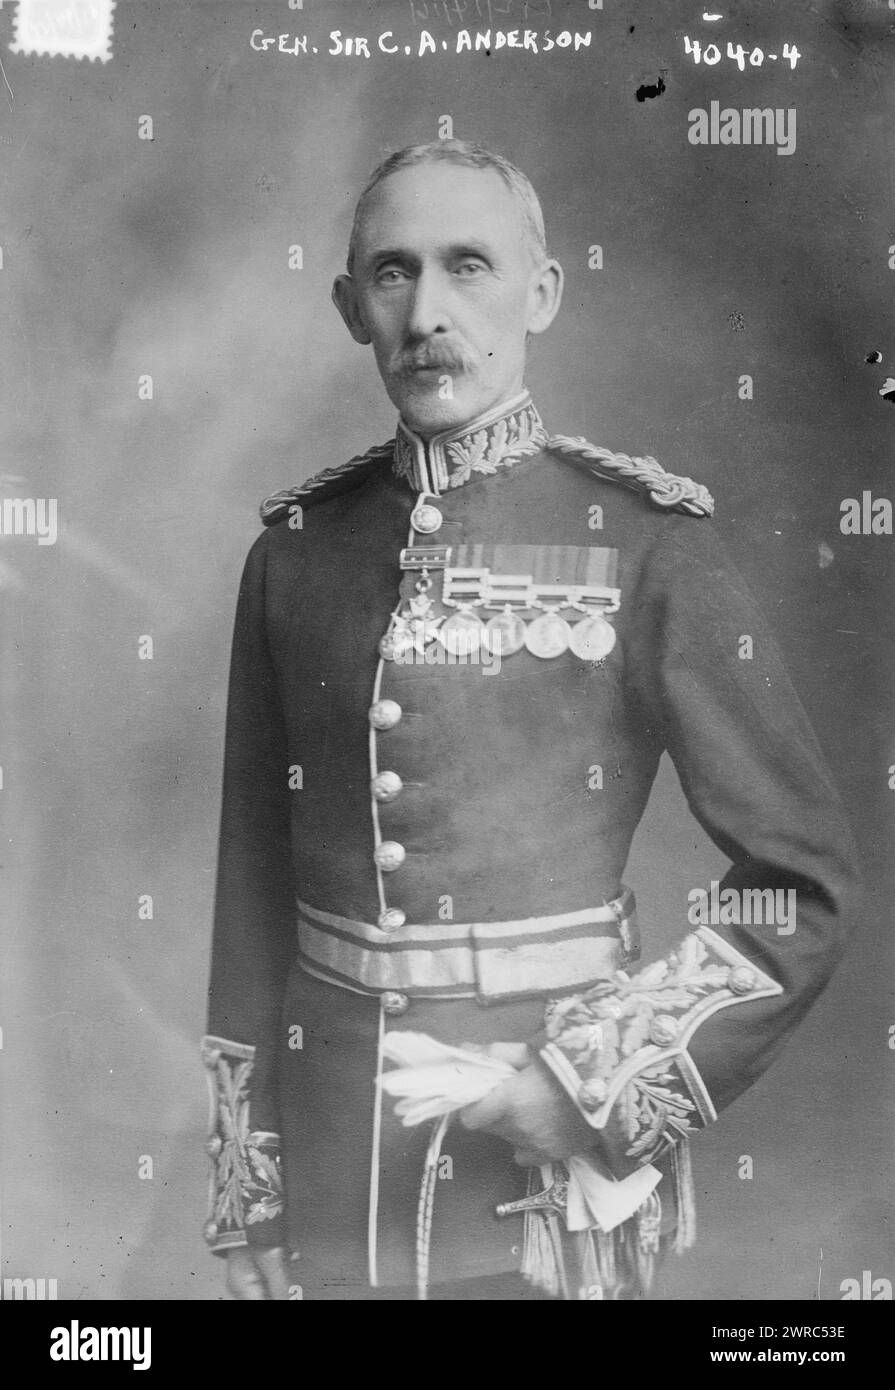 Gen. Sir C.A. Anderson, Photograph shows Lieutenant General Sir Charles Alexander Anderson, (1857-1940), Commander of British Troops in South China., 1916 Dec. 12, Glass negatives, 1 negative: glass Stock Photo